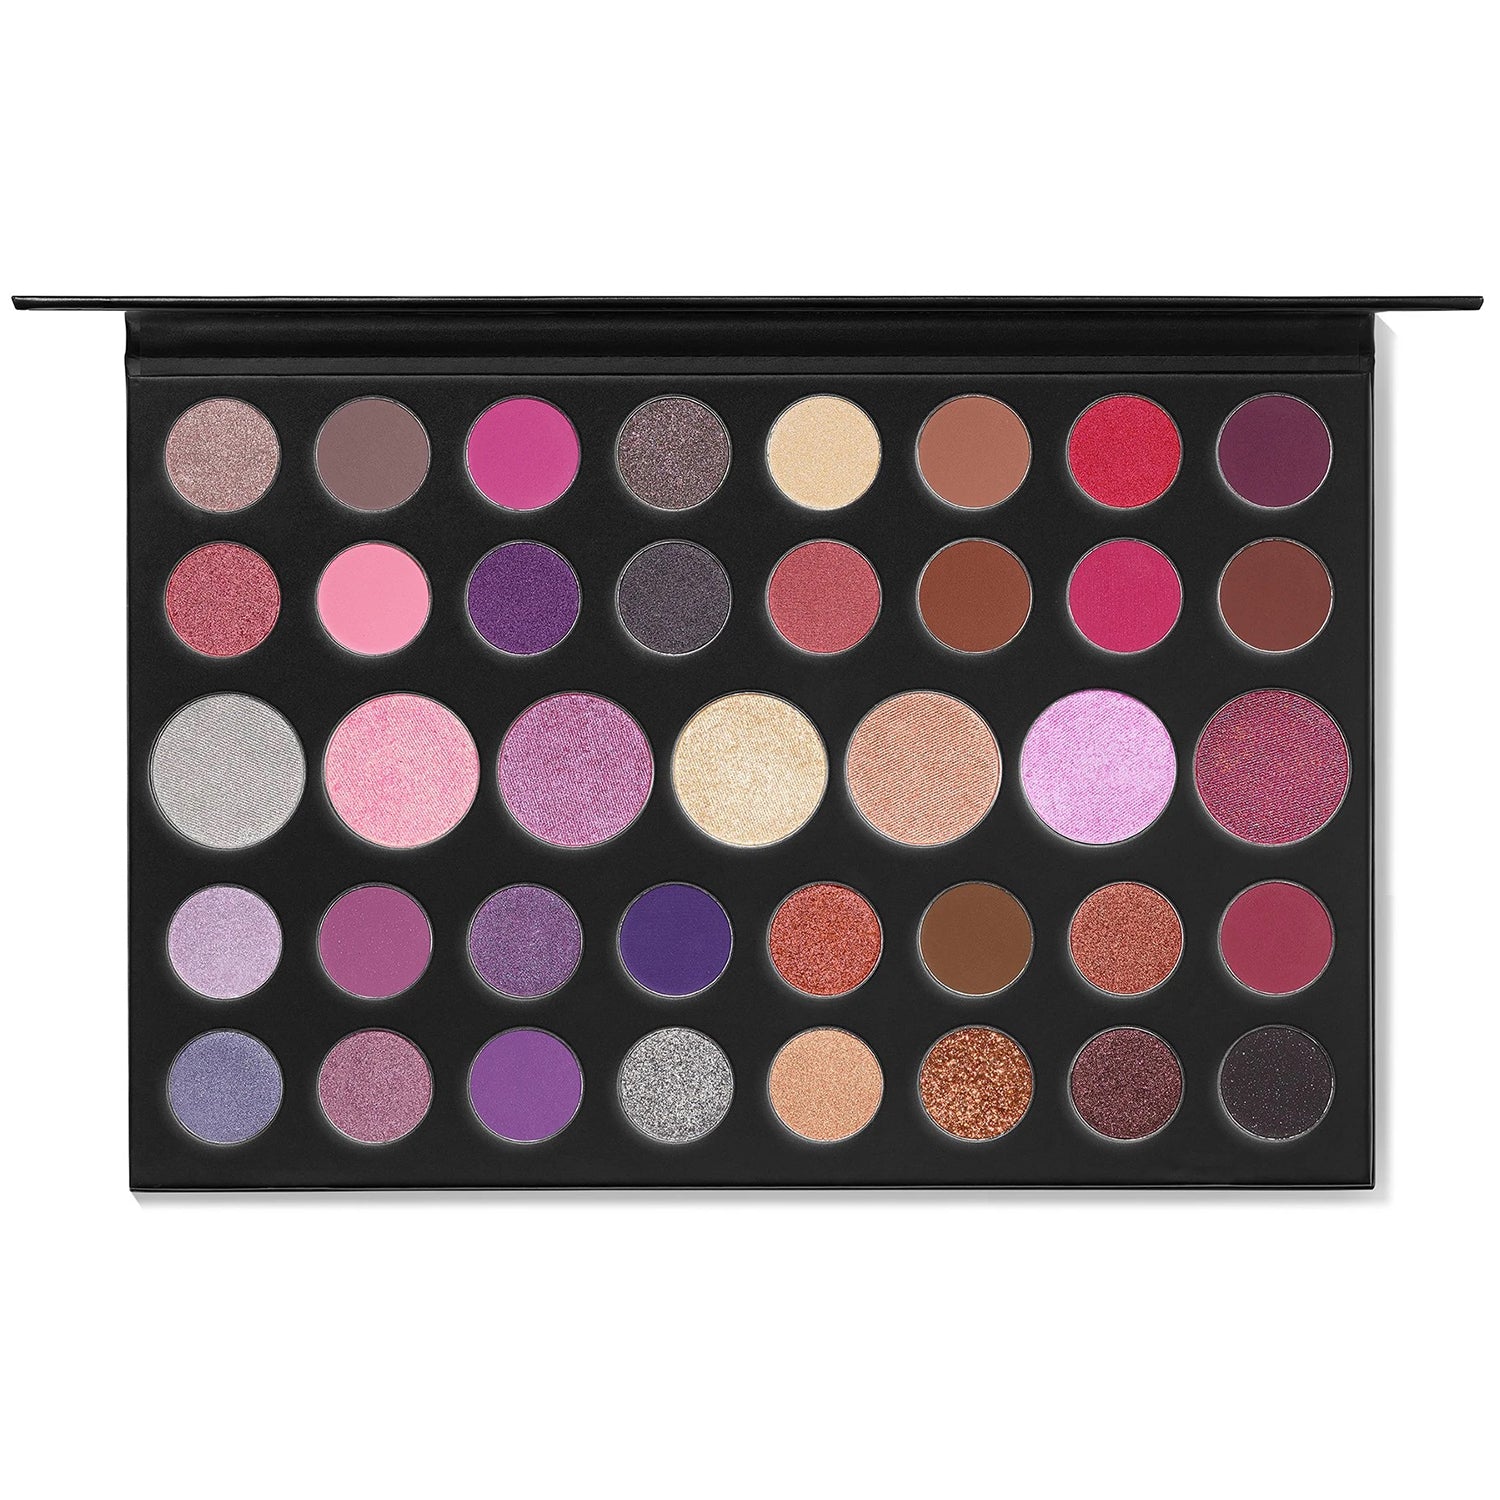 Morphe 39S Such a Gem Artistry Palette. Cash on delivery in karachi, lahore, islamabad, pakistan